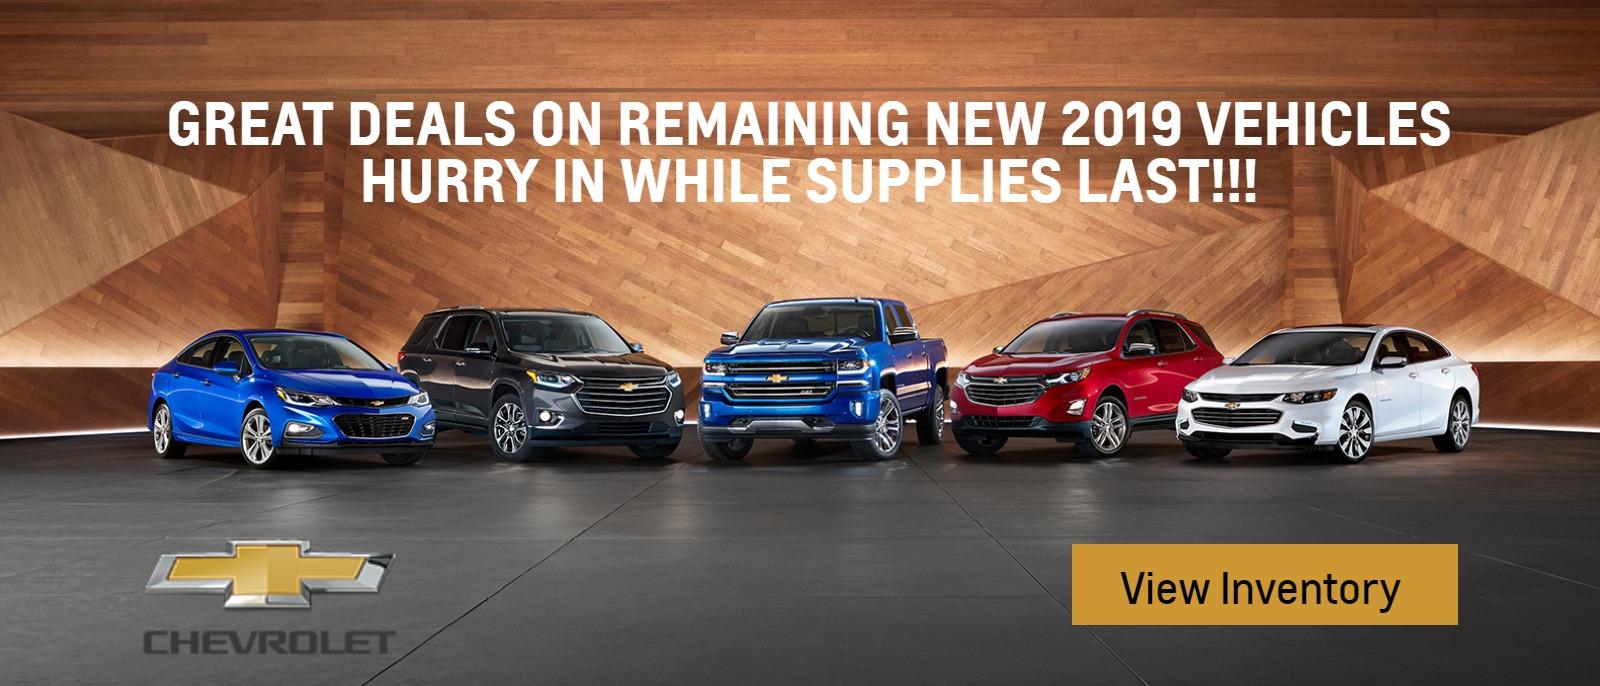 Great deals on remaining new 2019 vehicles